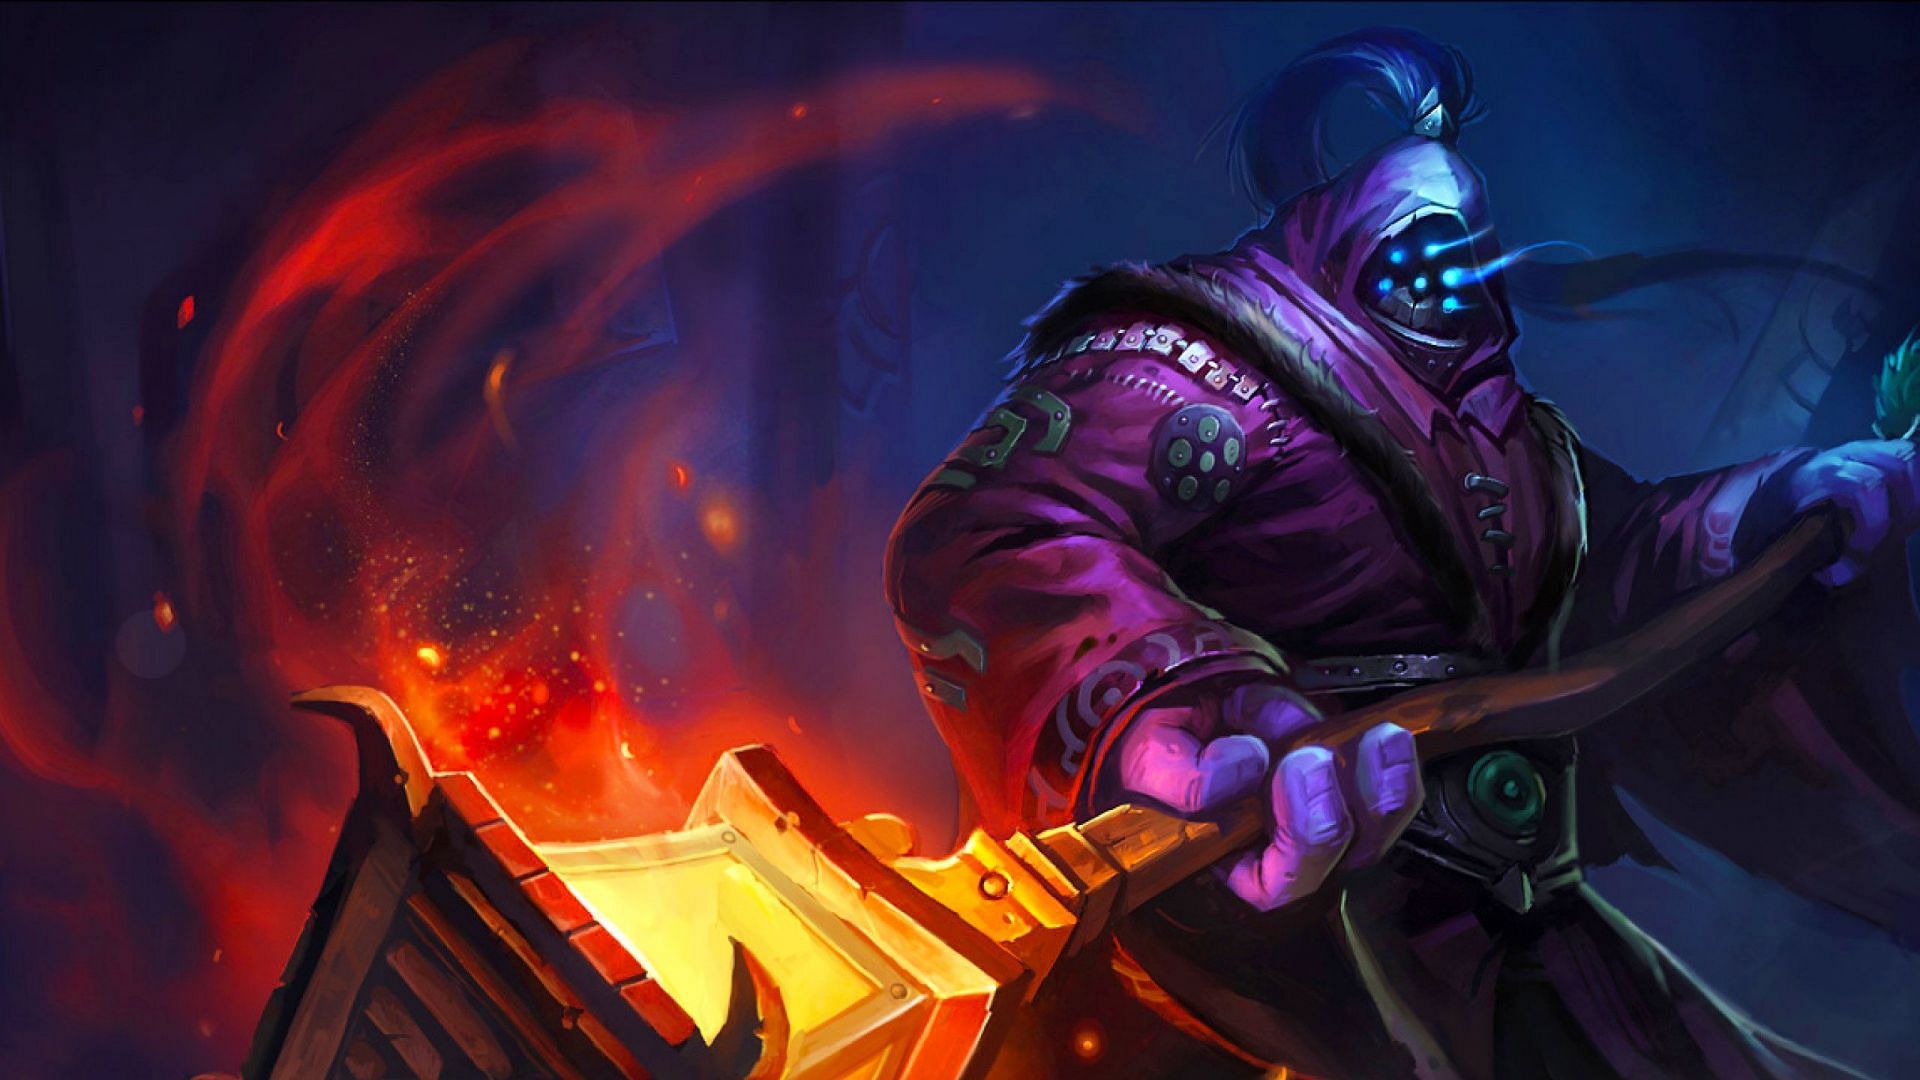 Jax, the greatest weapon master in Runeterra. (Image via Riot Games)